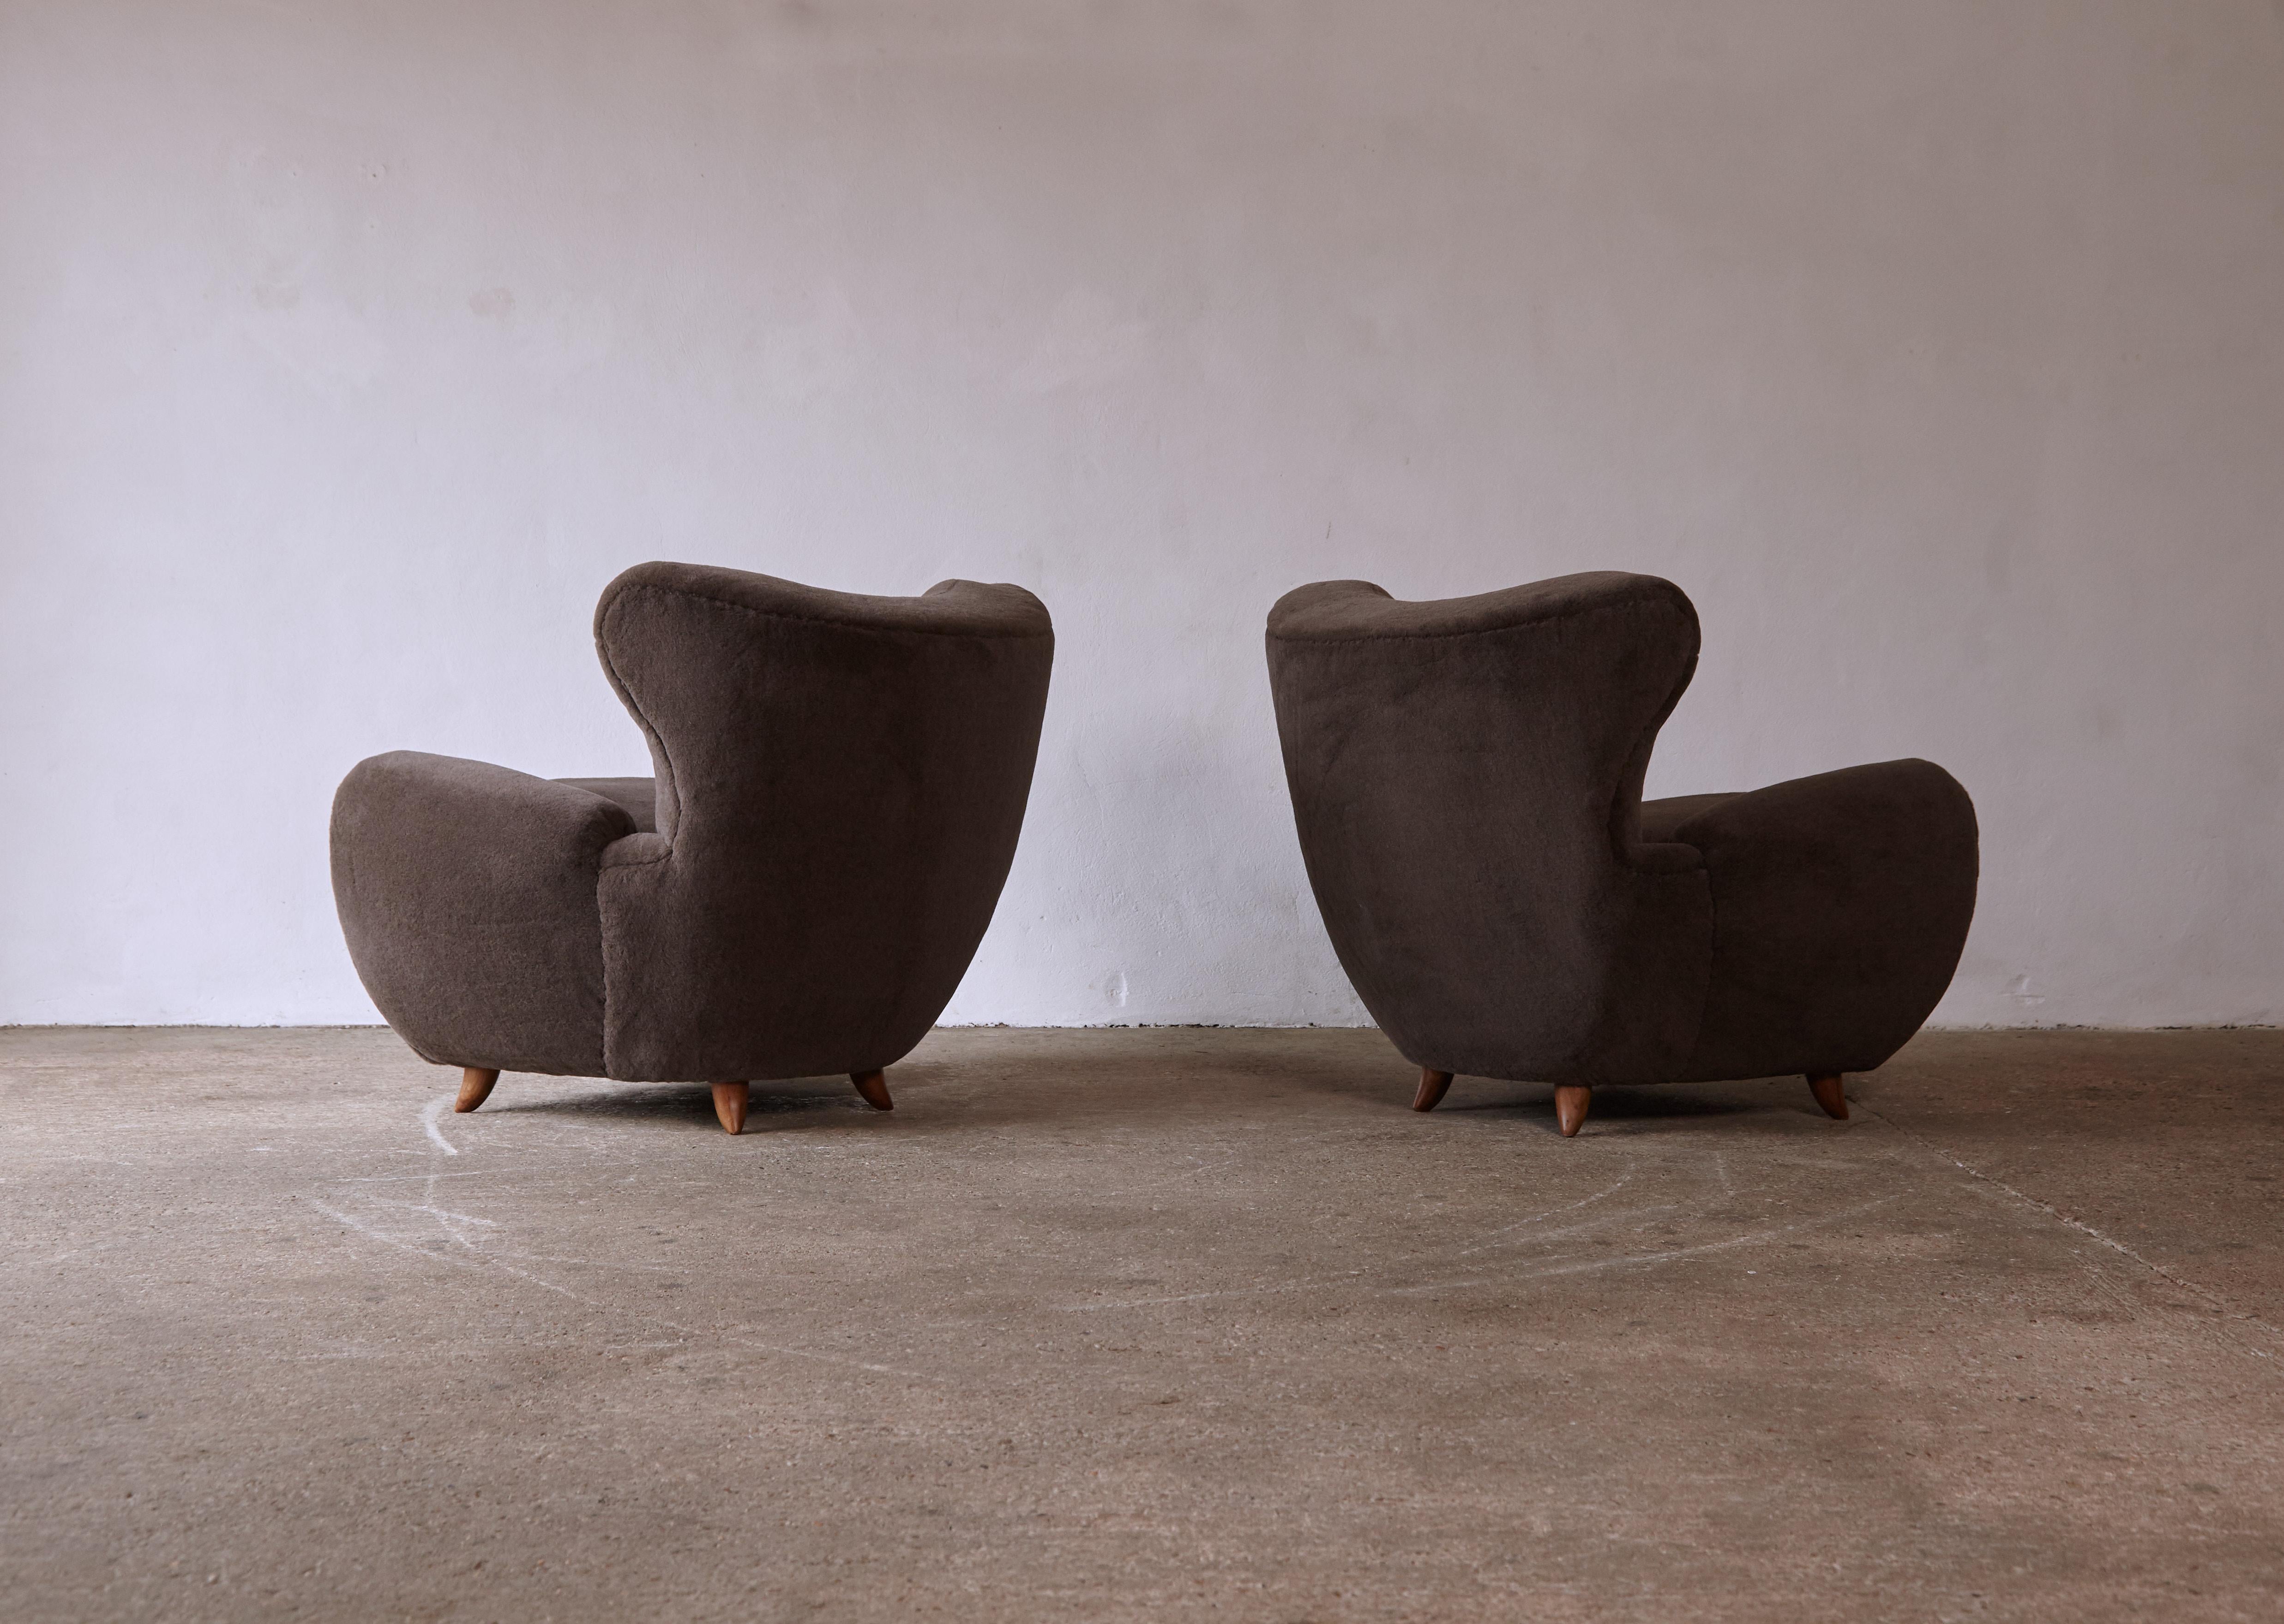 Italian Exceptional Lounge Chairs, Upholstered in Alpaca, Italy, 1950s For Sale